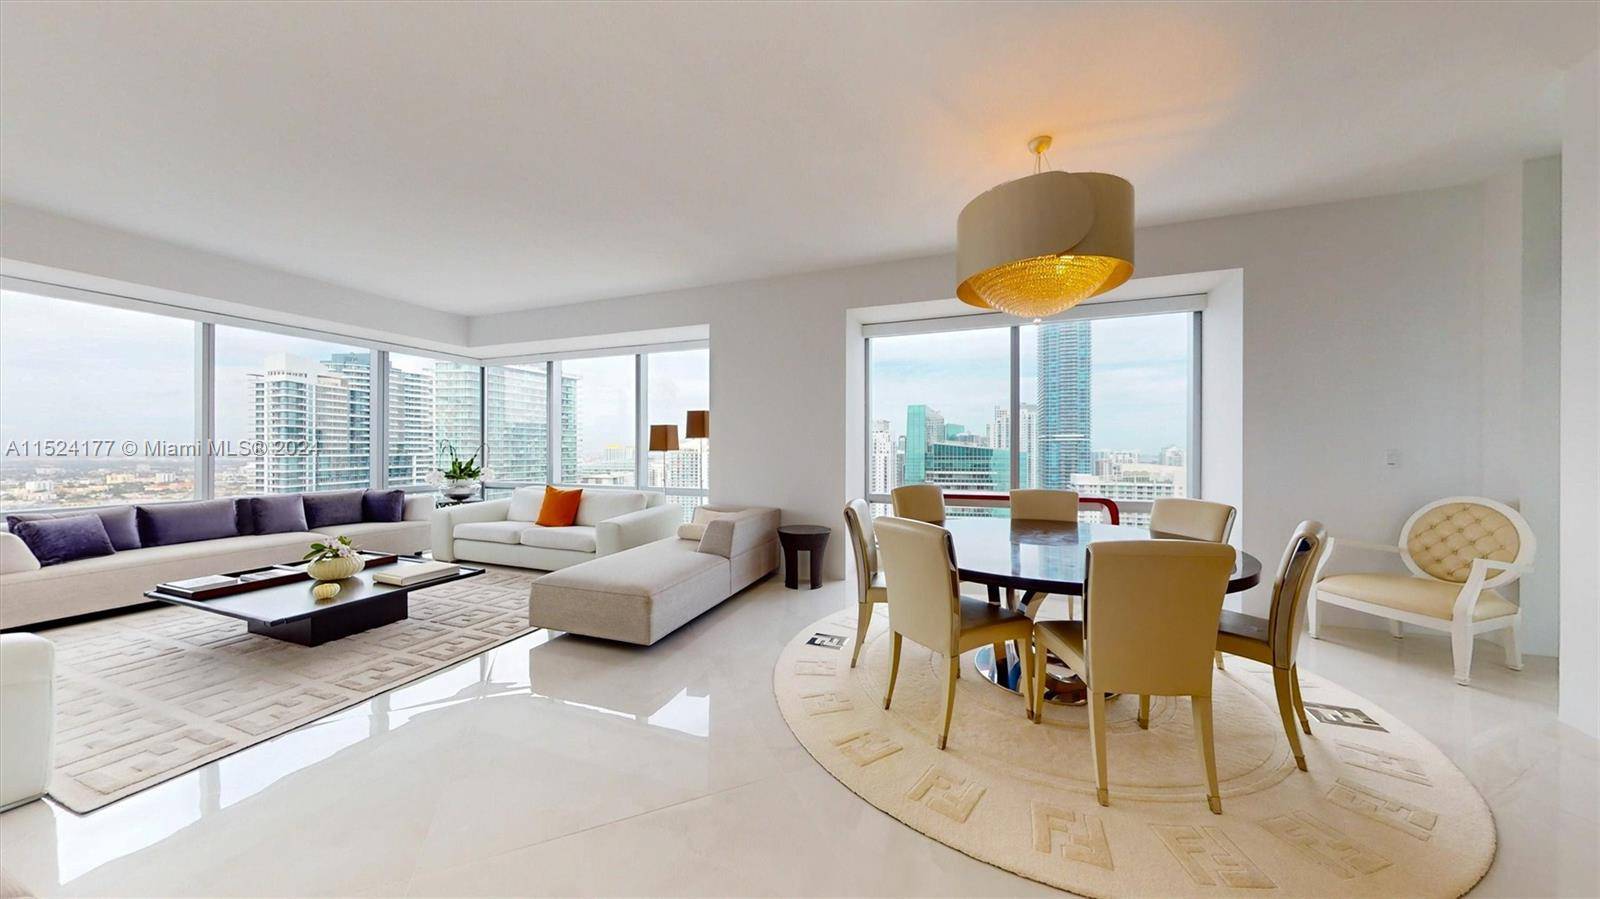 Stunning two bedroom, 2. 5 bathroom residence in the renowned Four Seasons on Brickell !